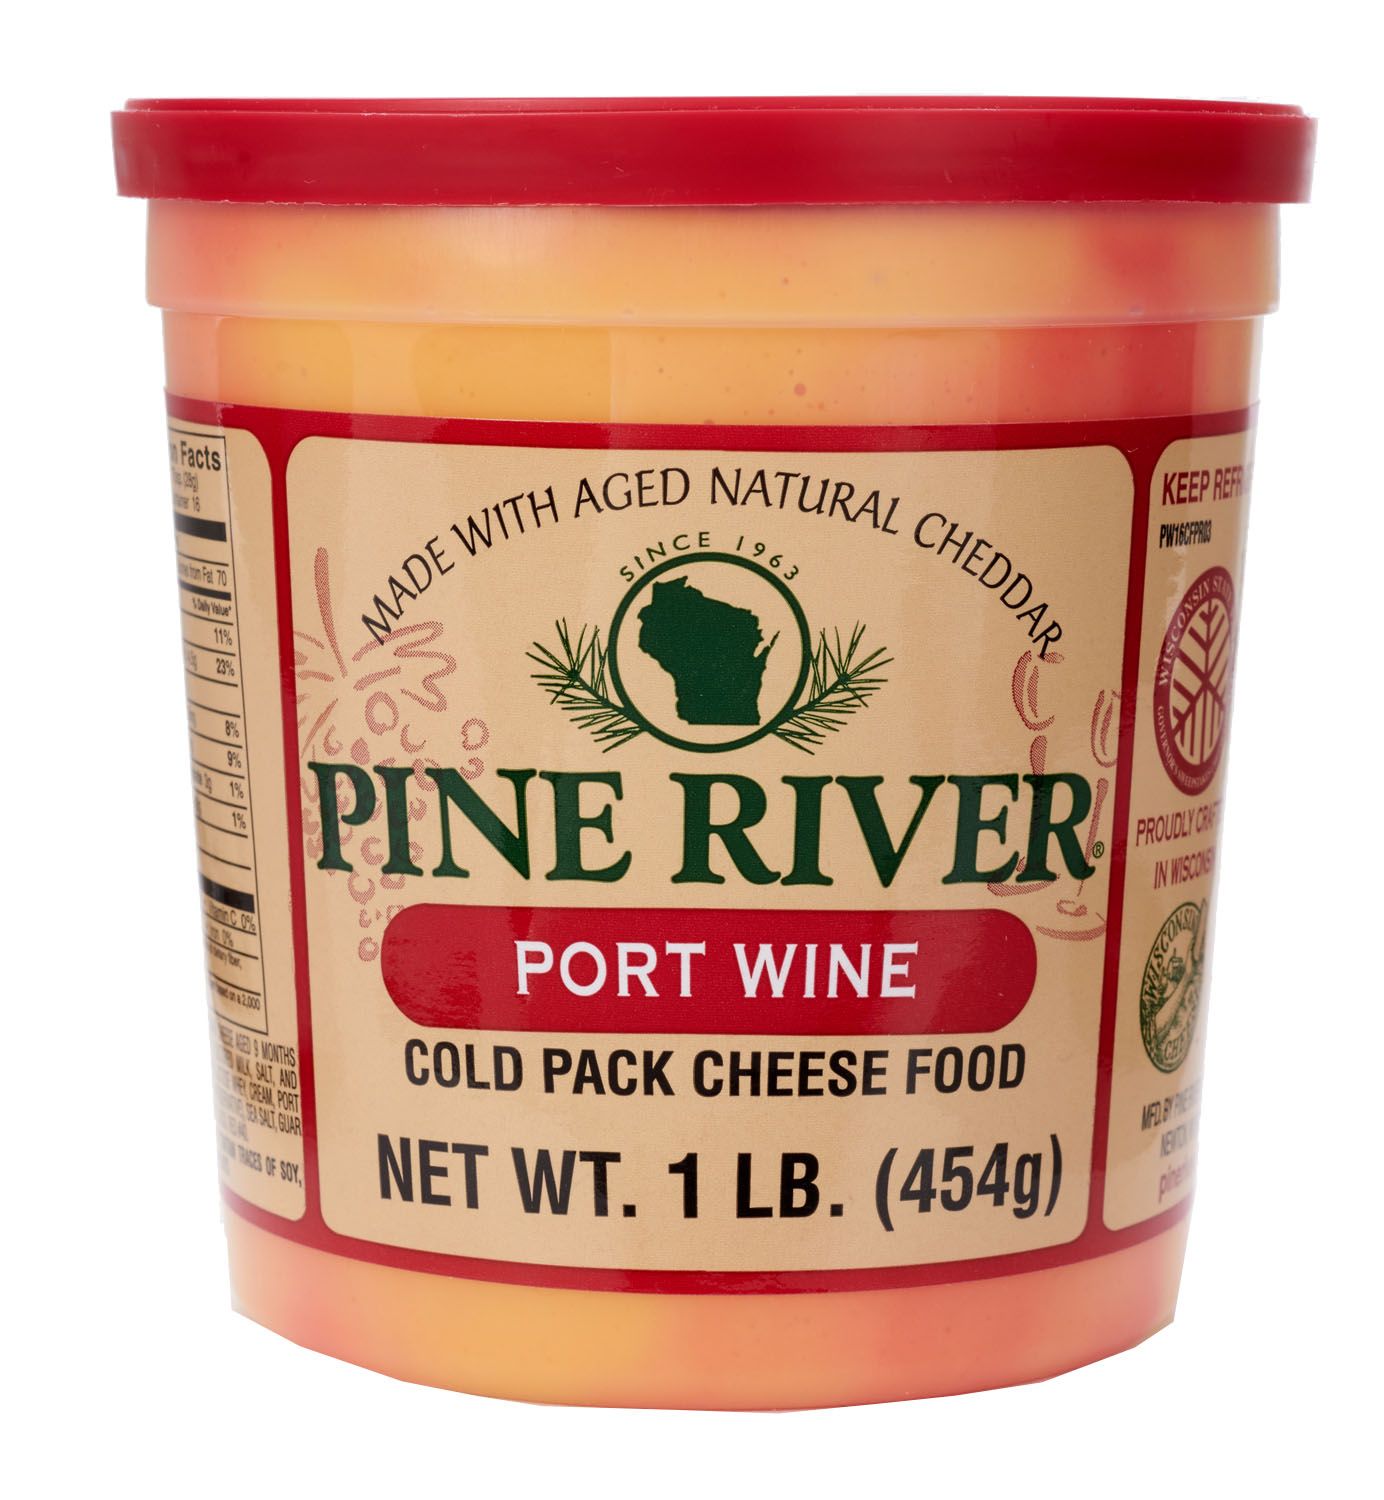 Pine River Port Wine Cold Pack Cheese Spread, 16 oz.